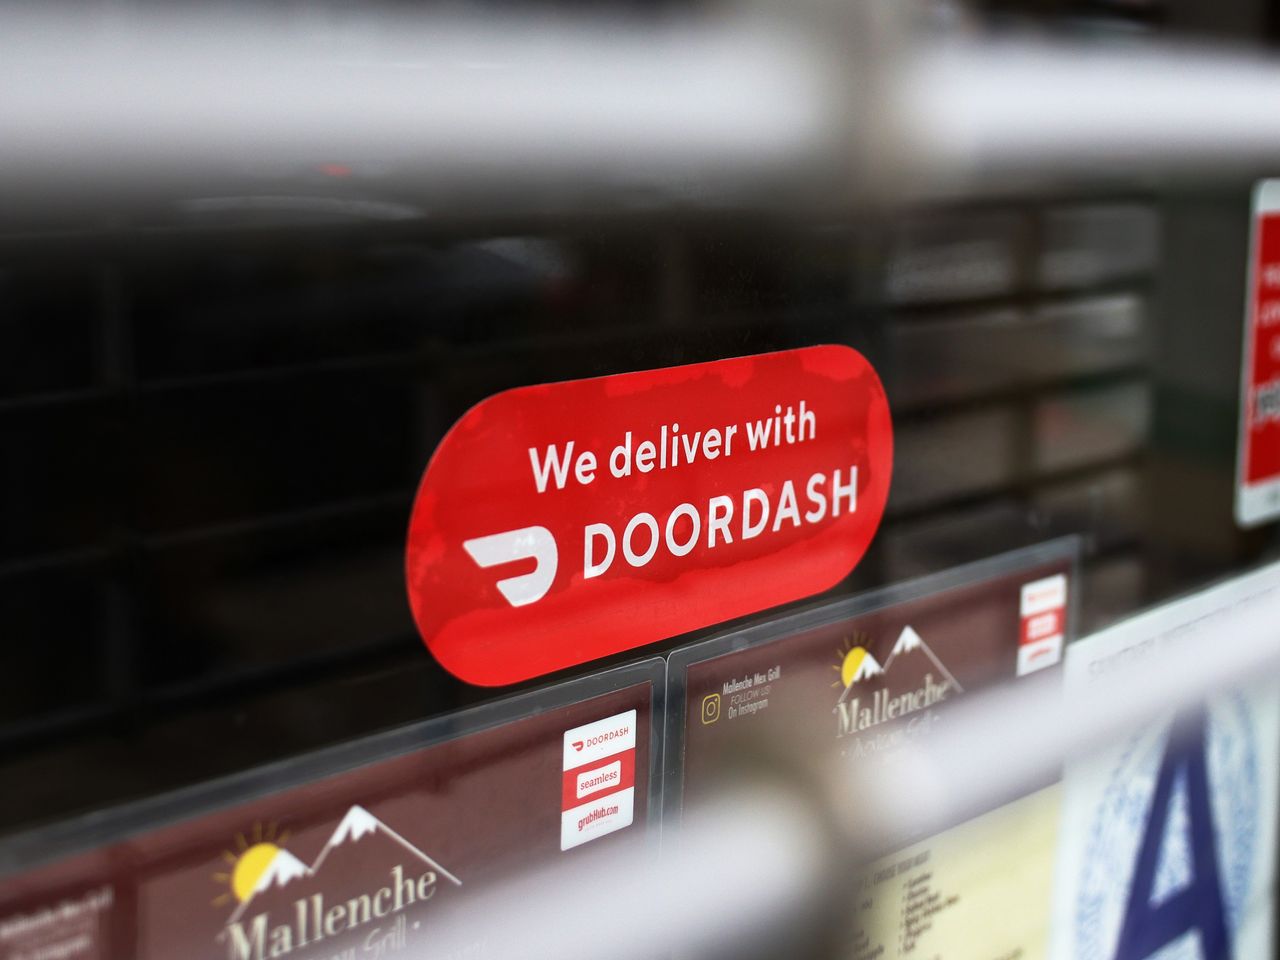 What is How Much Did DoorDash Lose?